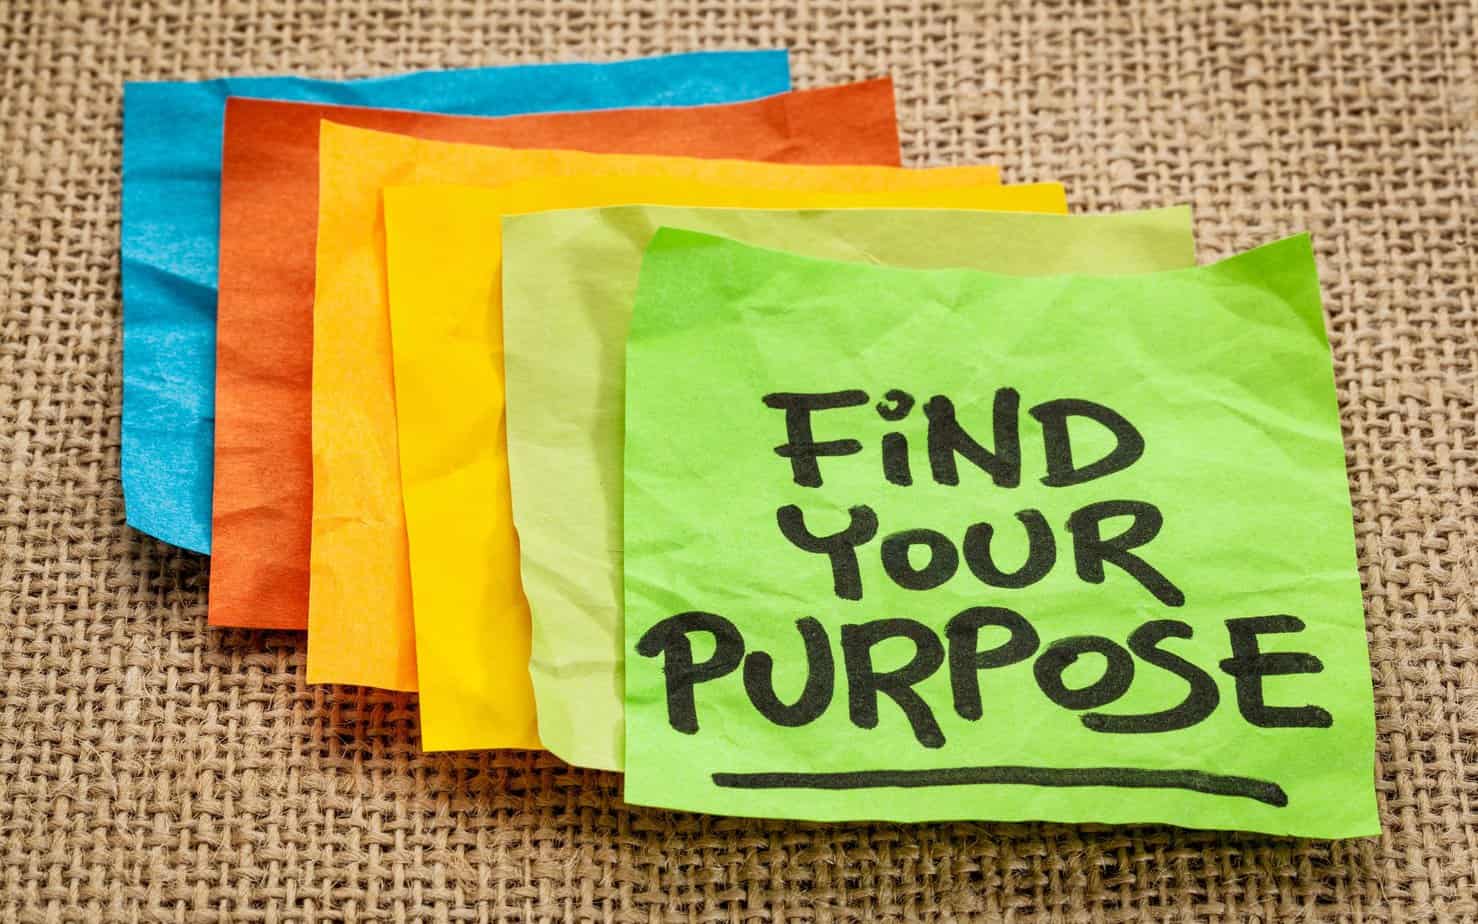 Find your purpose in life, this is your hour!